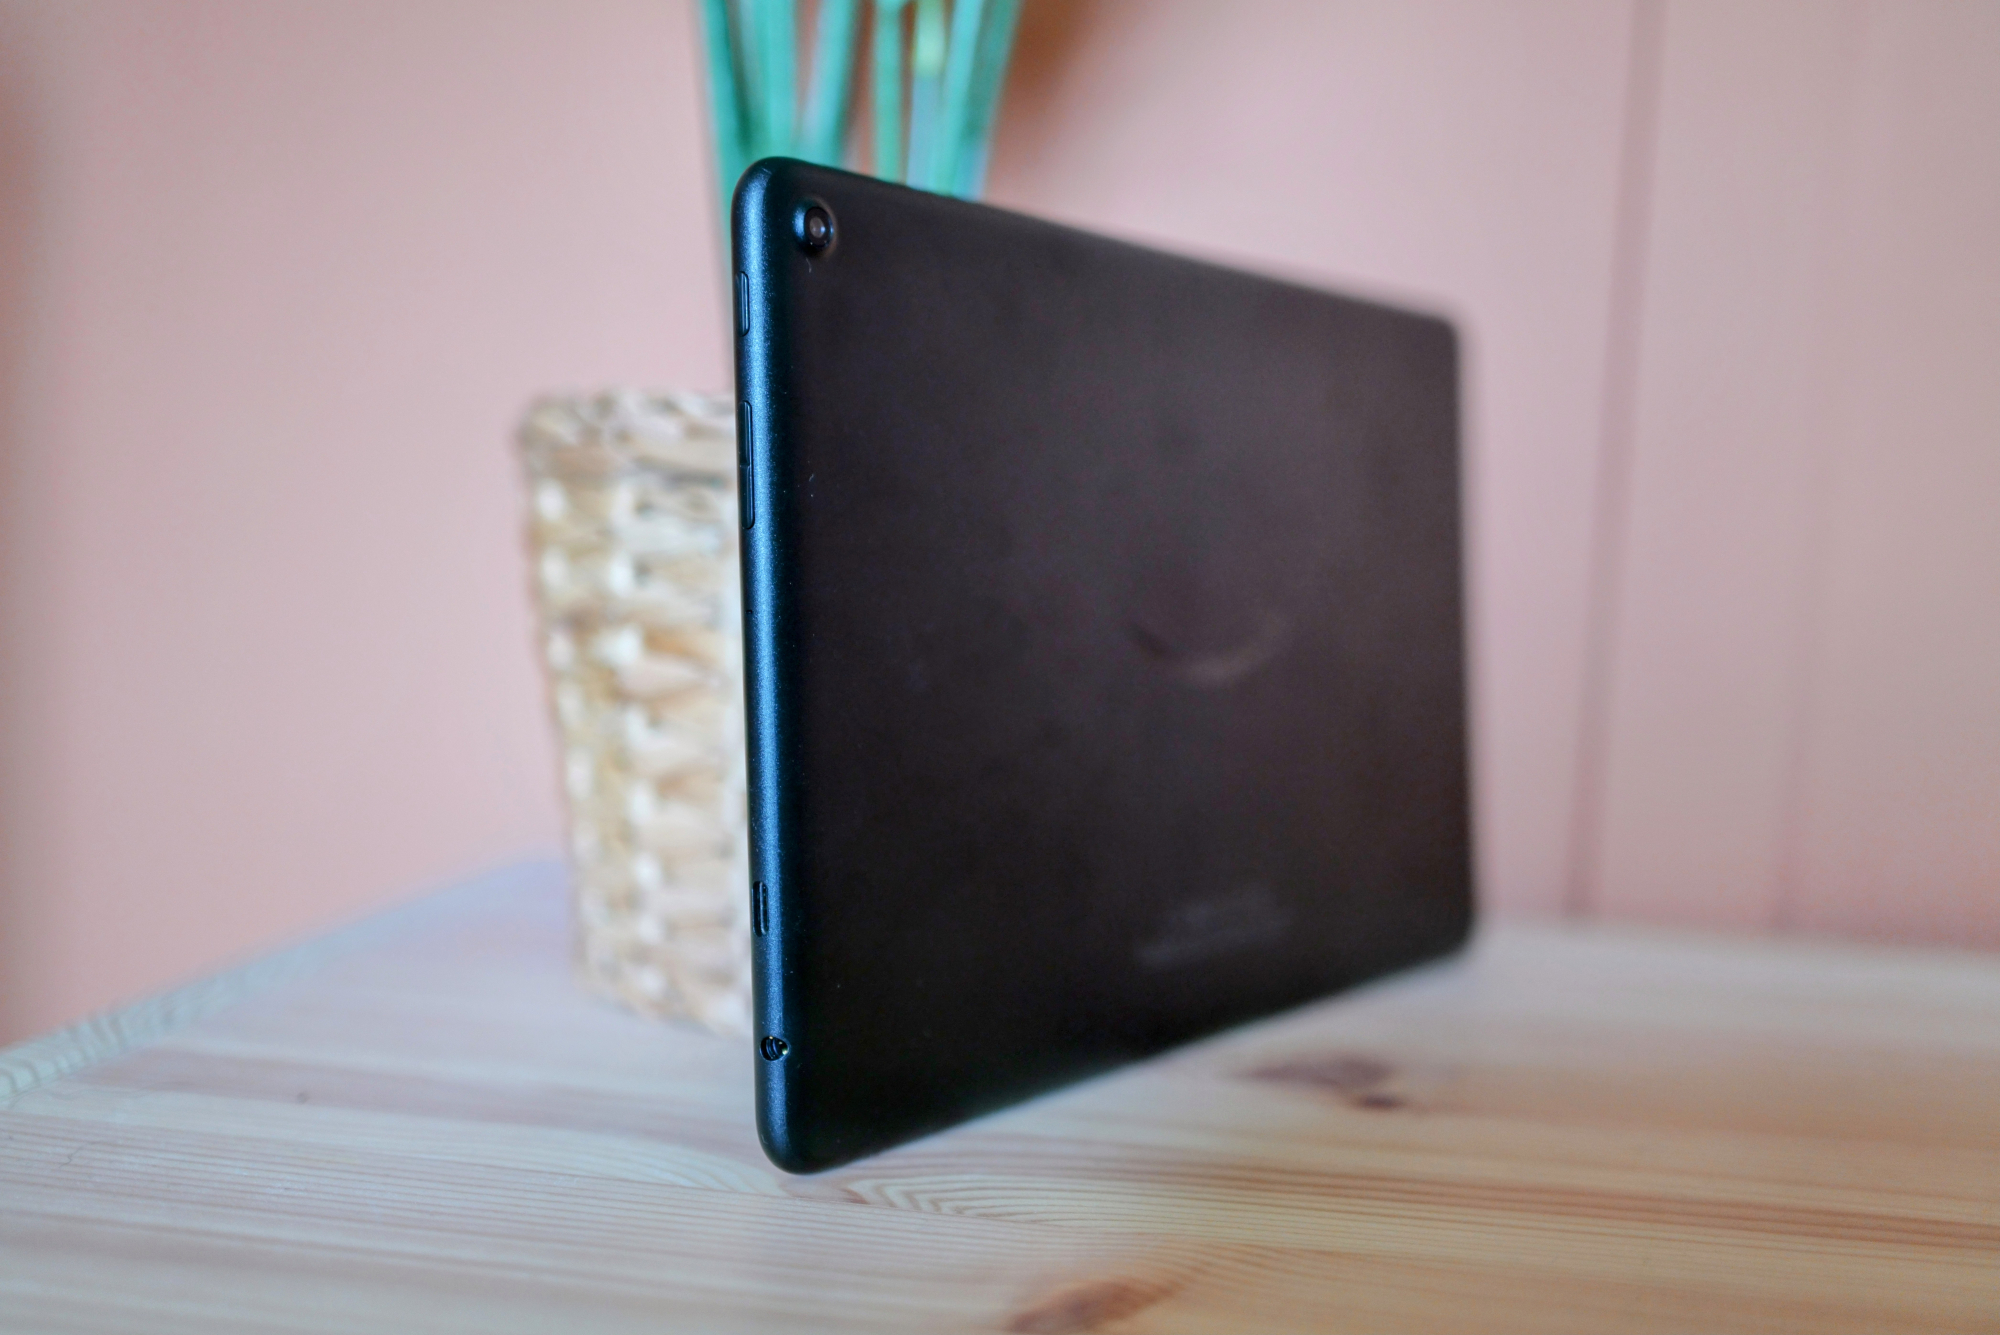 Amazon Fire HD 10 tablet leaning on a plant pot, showing buttons